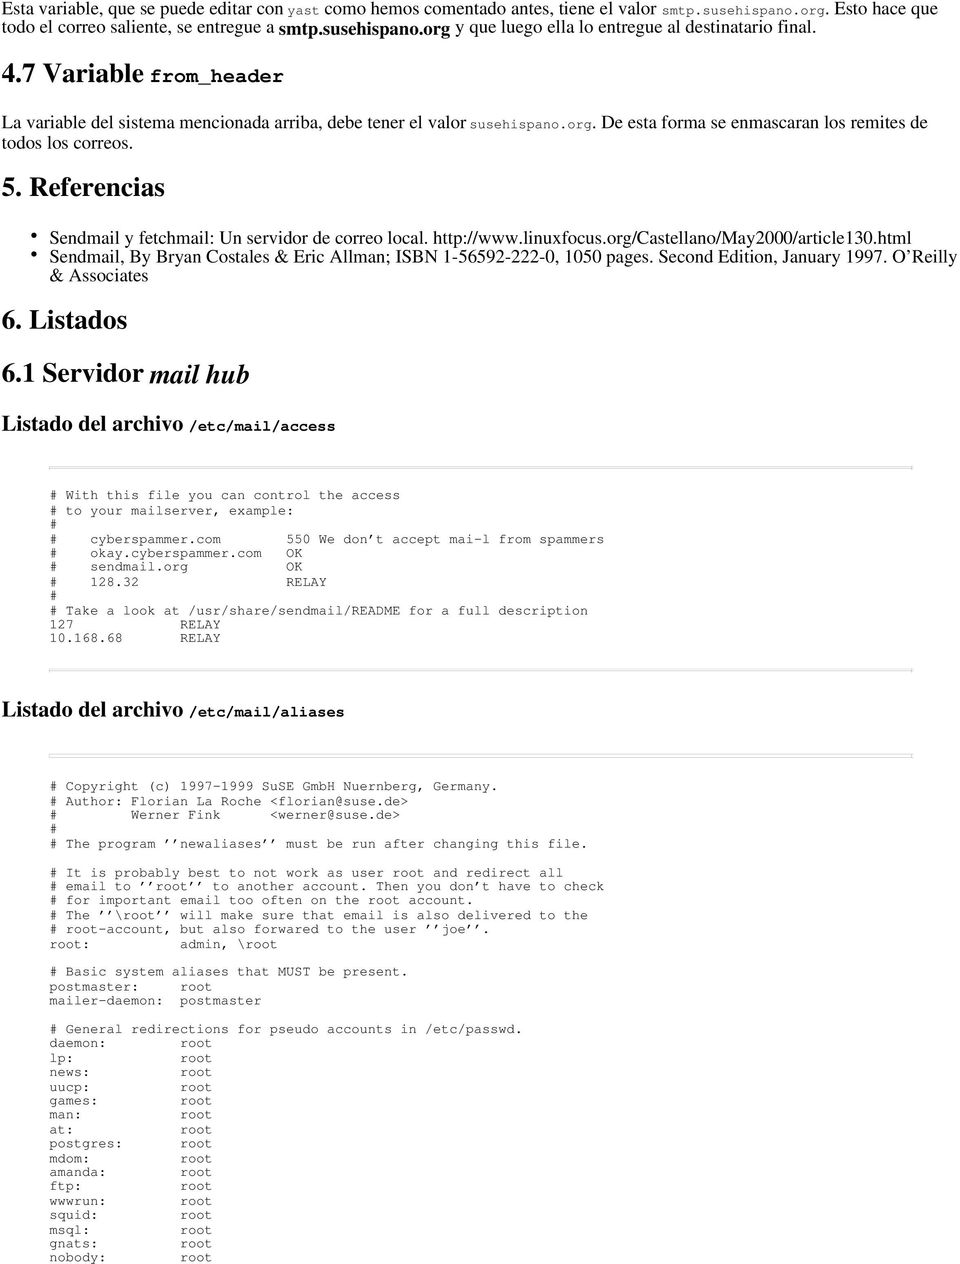 Referencias Sendmail y fetchmail: Un servidor de correo local. http://www.linuxfocus.org/castellano/may2000/article130.html Sendmail, By Bryan Costales & Eric Allman; ISBN 1-56592-222-0, 1050 pages.